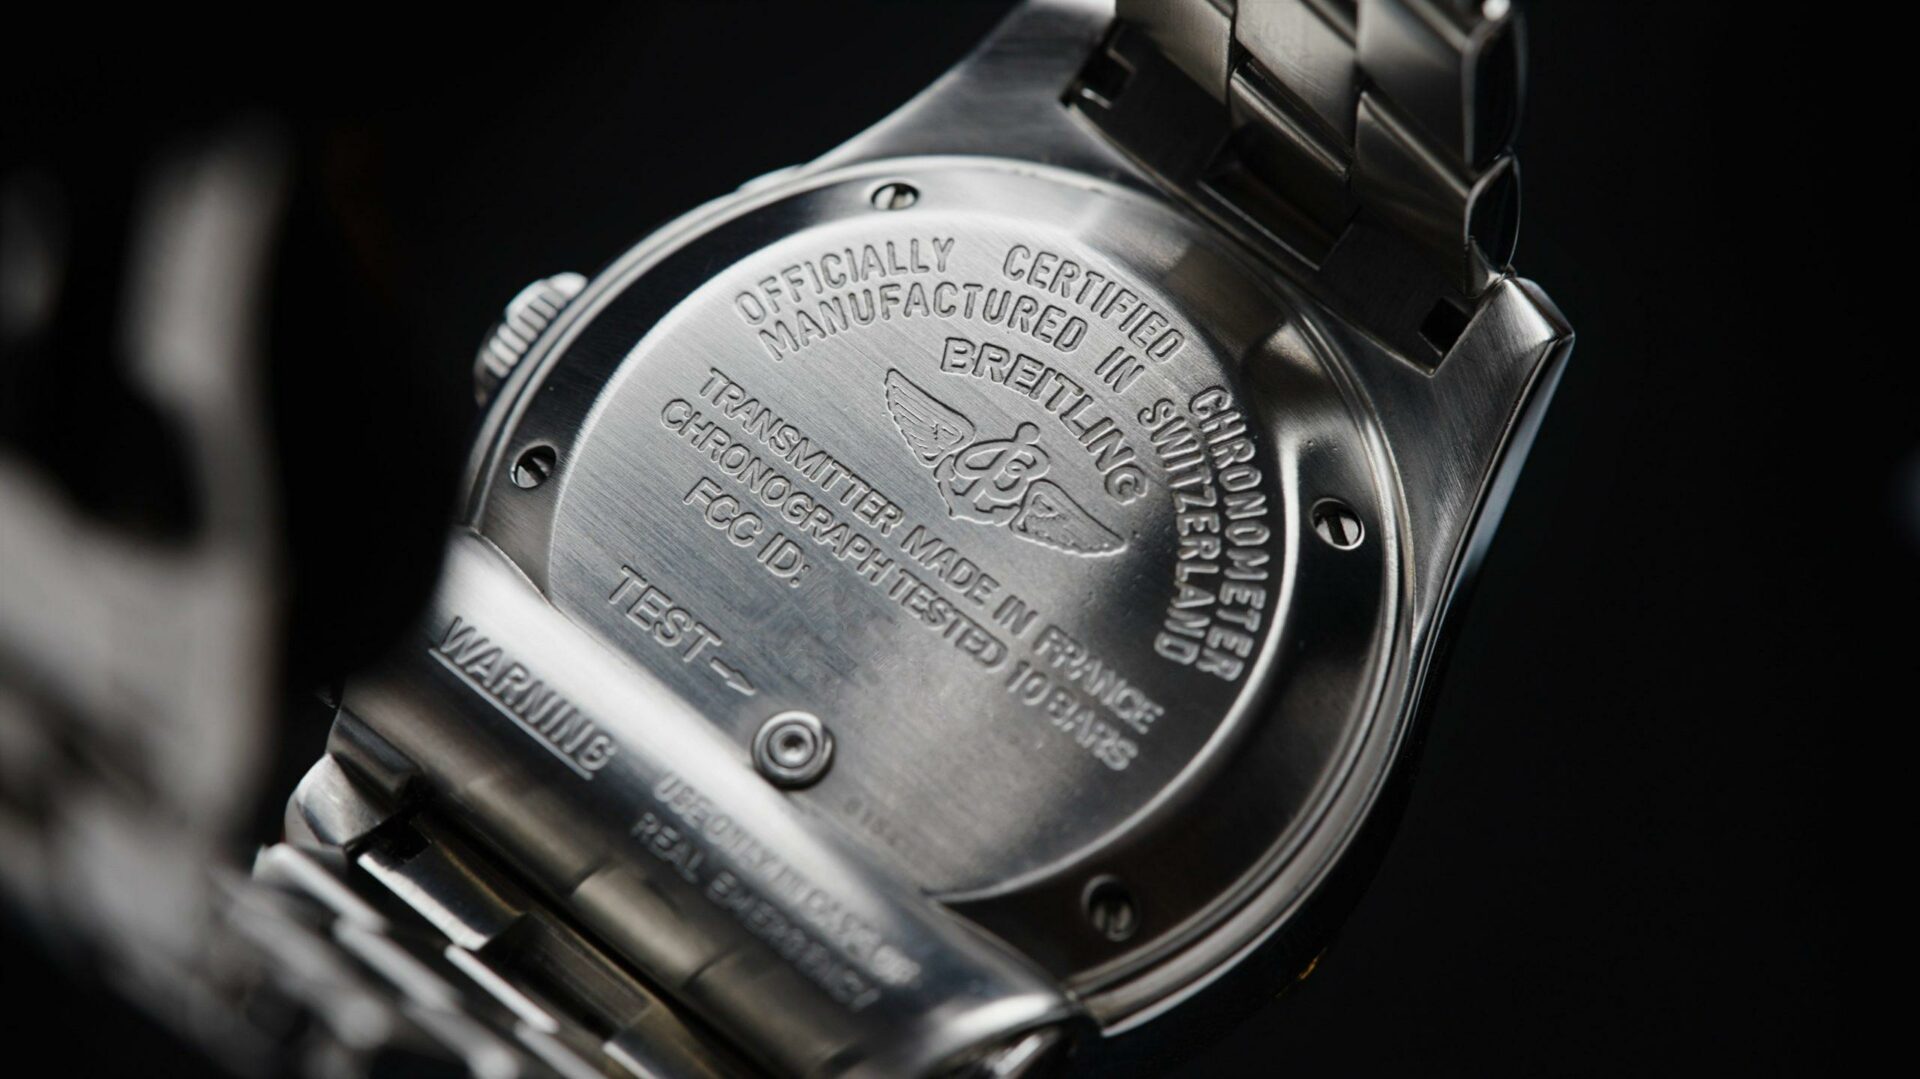 Back side of the Breitling Emergency Mission watch.